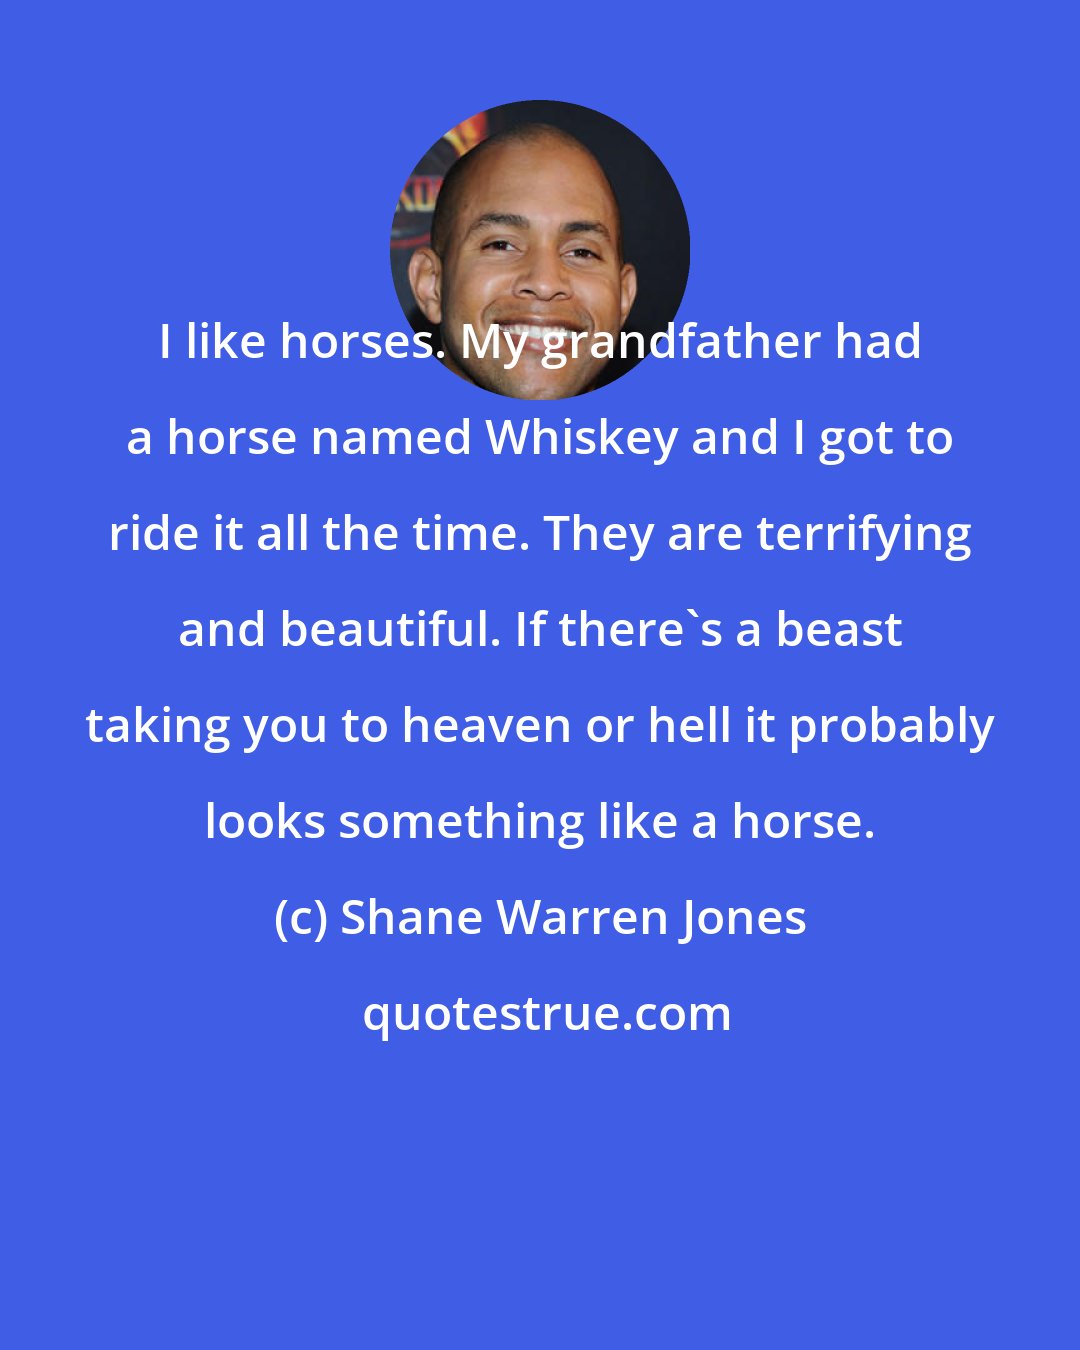 Shane Warren Jones: I like horses. My grandfather had a horse named Whiskey and I got to ride it all the time. They are terrifying and beautiful. If there's a beast taking you to heaven or hell it probably looks something like a horse.